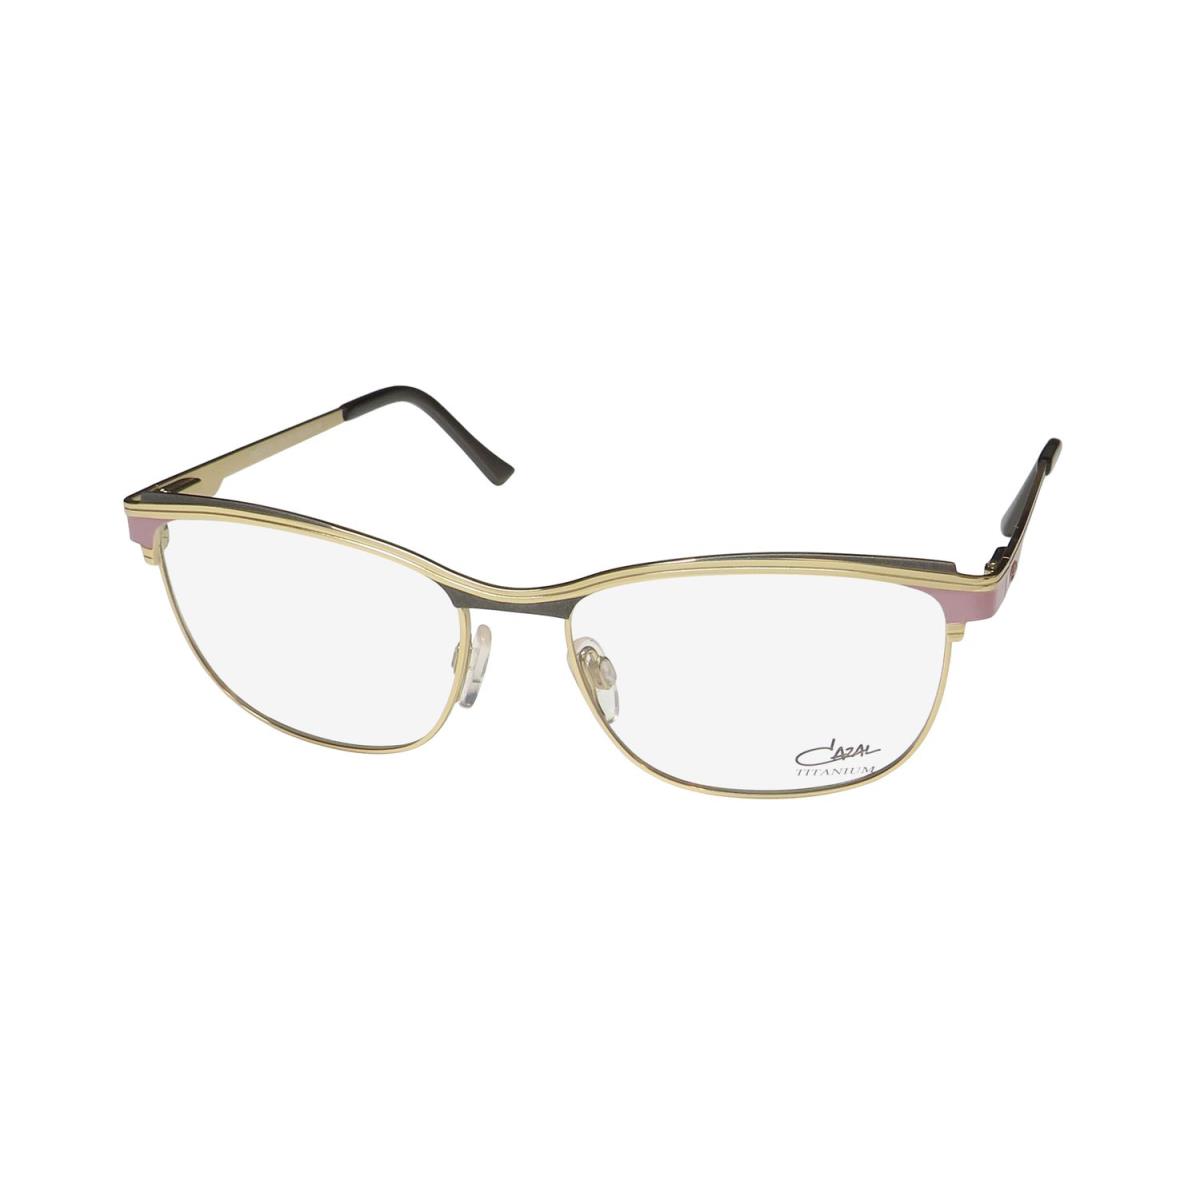 Cazal 1250 Titanium Imported From Germany Rare Eyeglass Frame/glasses Gold / Gray / Lilac